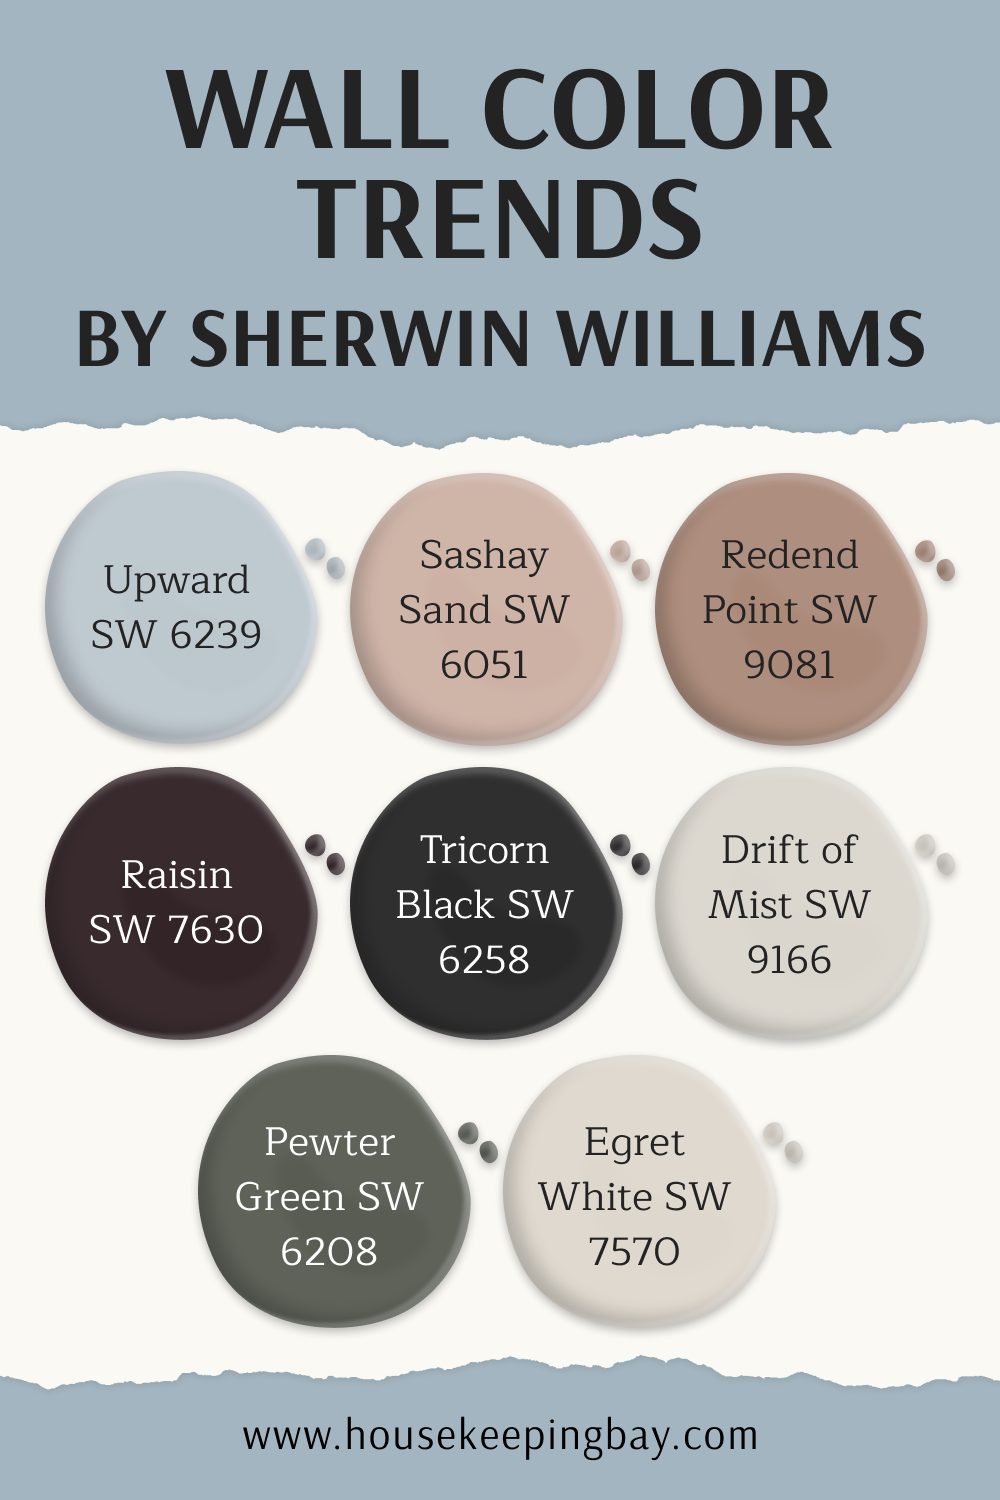 Wall Color Trends Sherwin Williams (1)